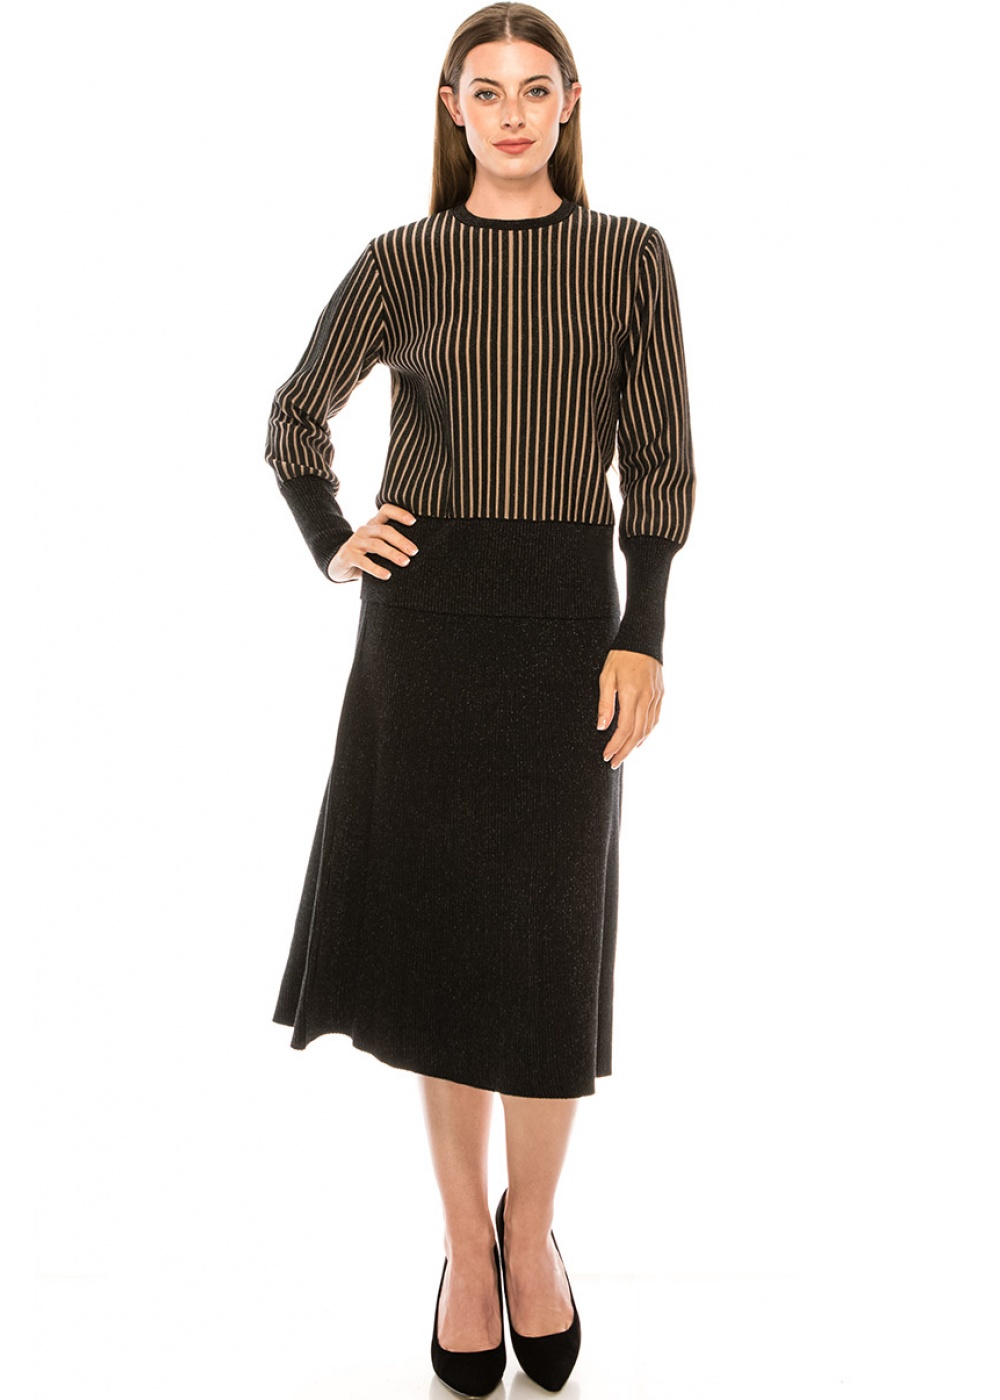 Striped sweater with leg-of-mutton sleeves